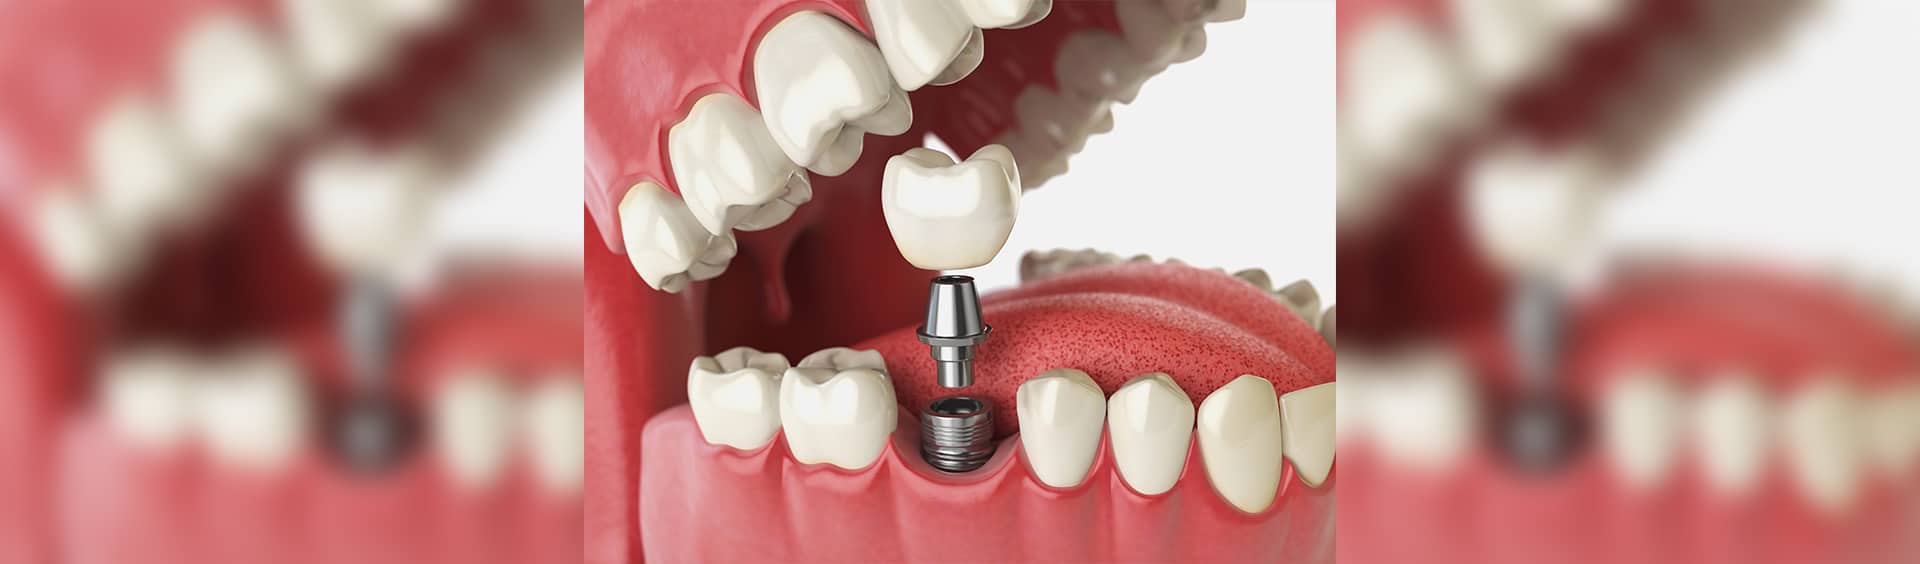 A-Dental Center - What Are Dental Implants?